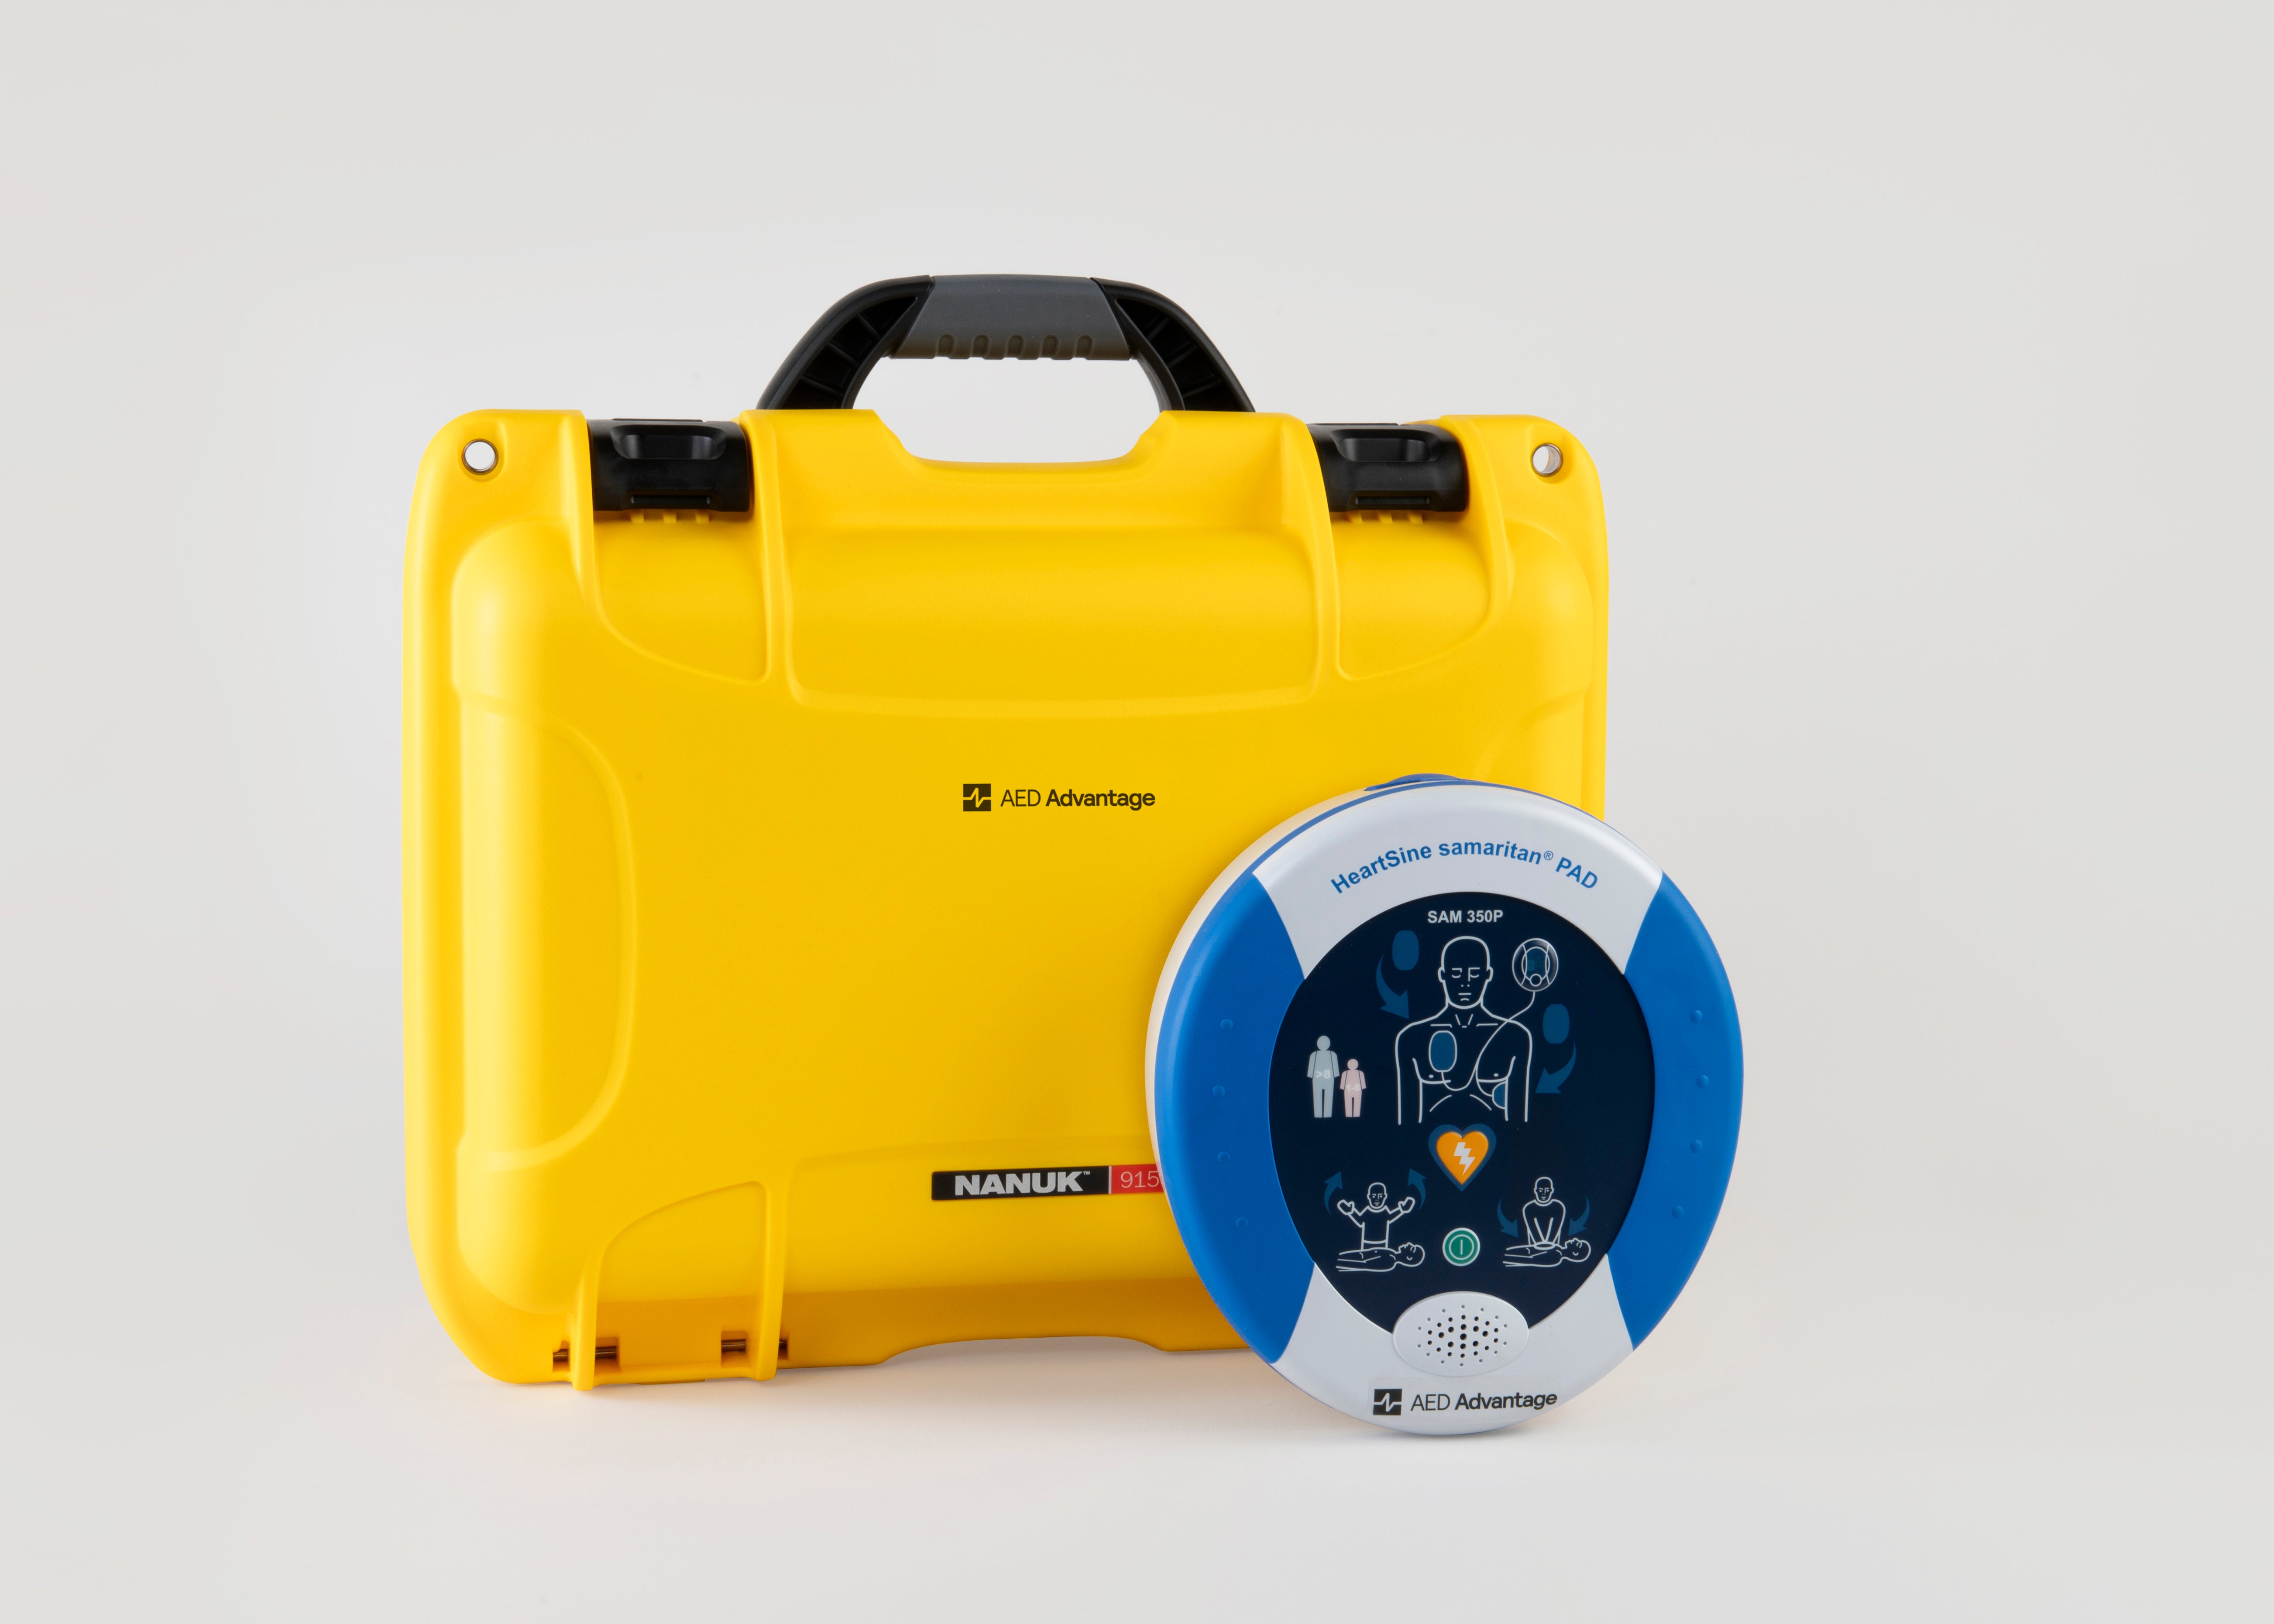 A blue and gray HeartSine 350P AED standing next to a bright yellow hardshell carry case